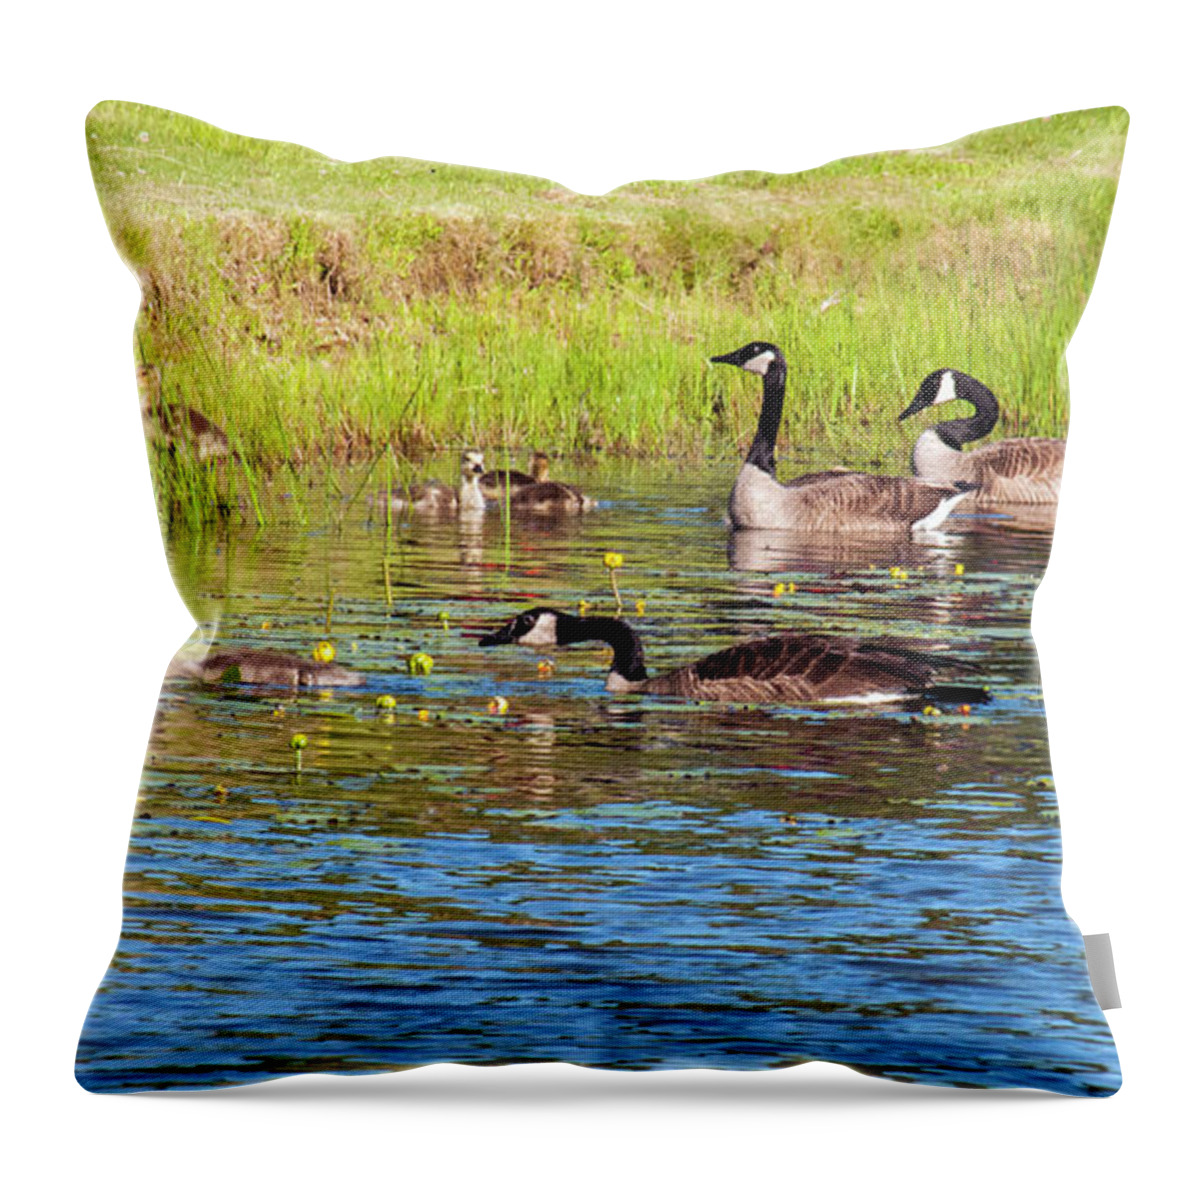 Geese Throw Pillow featuring the photograph Springtime At The Pond by Cathy Kovarik